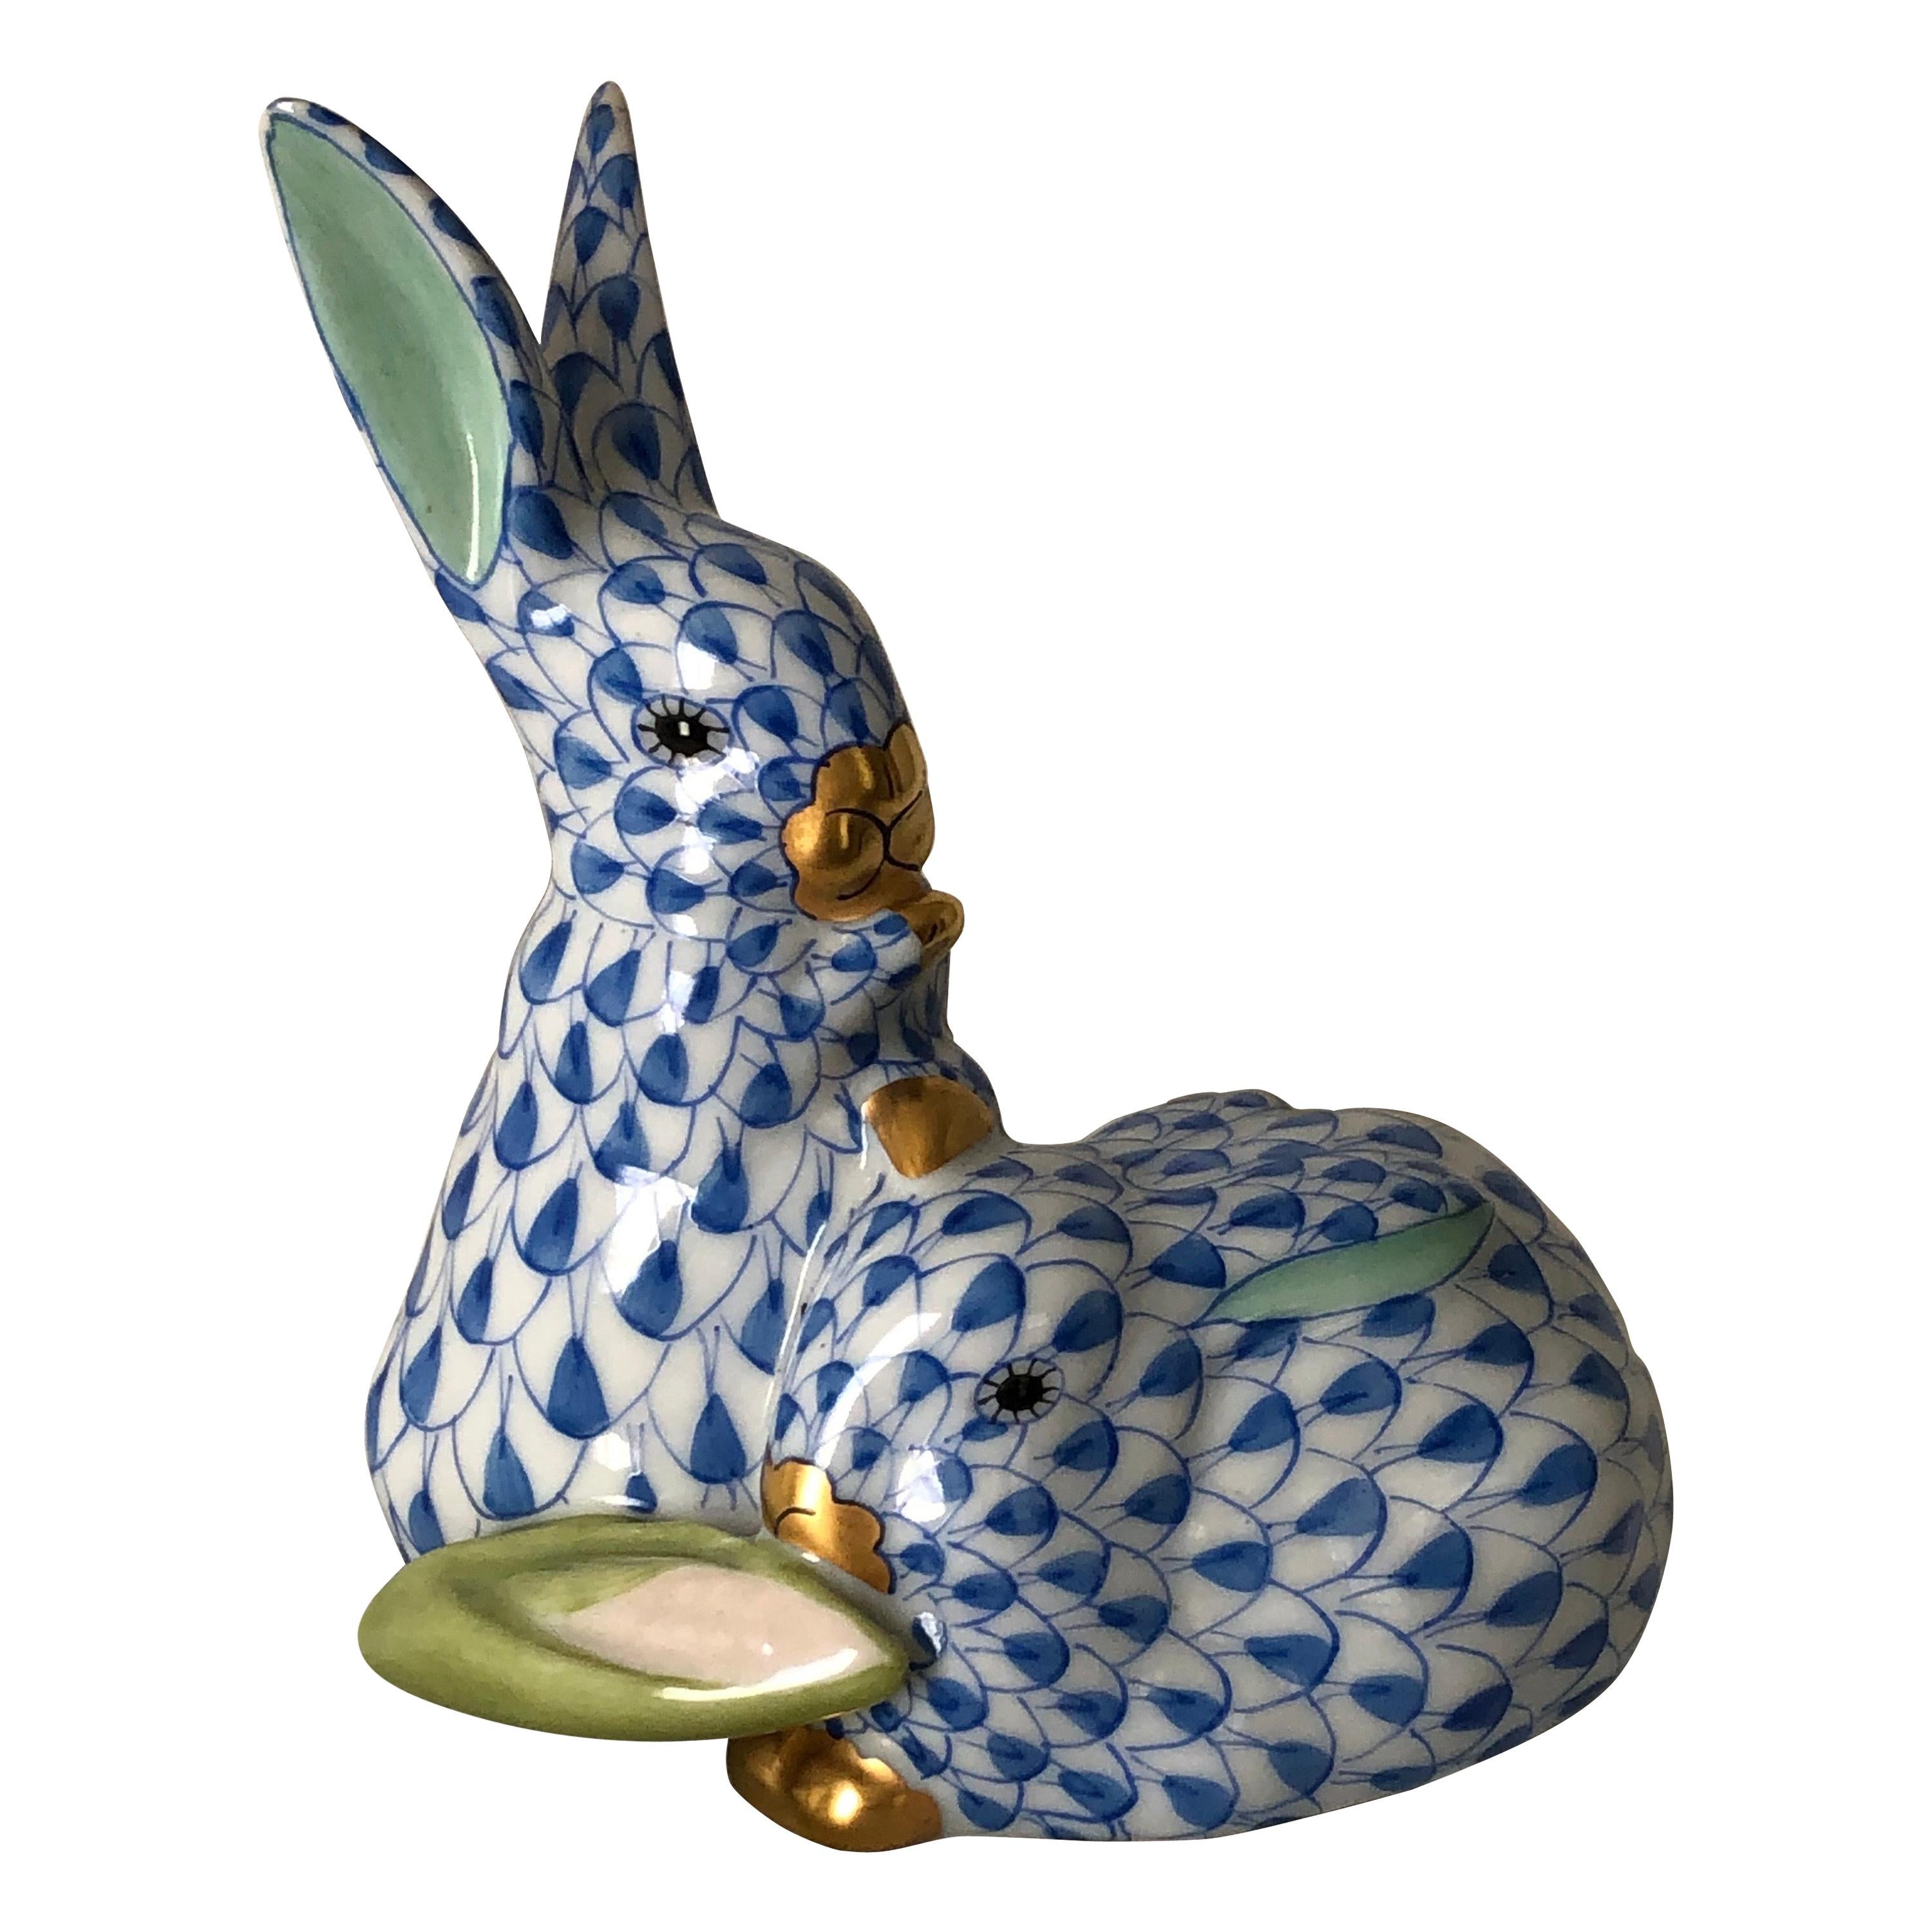 Two Herend Porcelain Rabbits Cuddling Together with Corn Cob